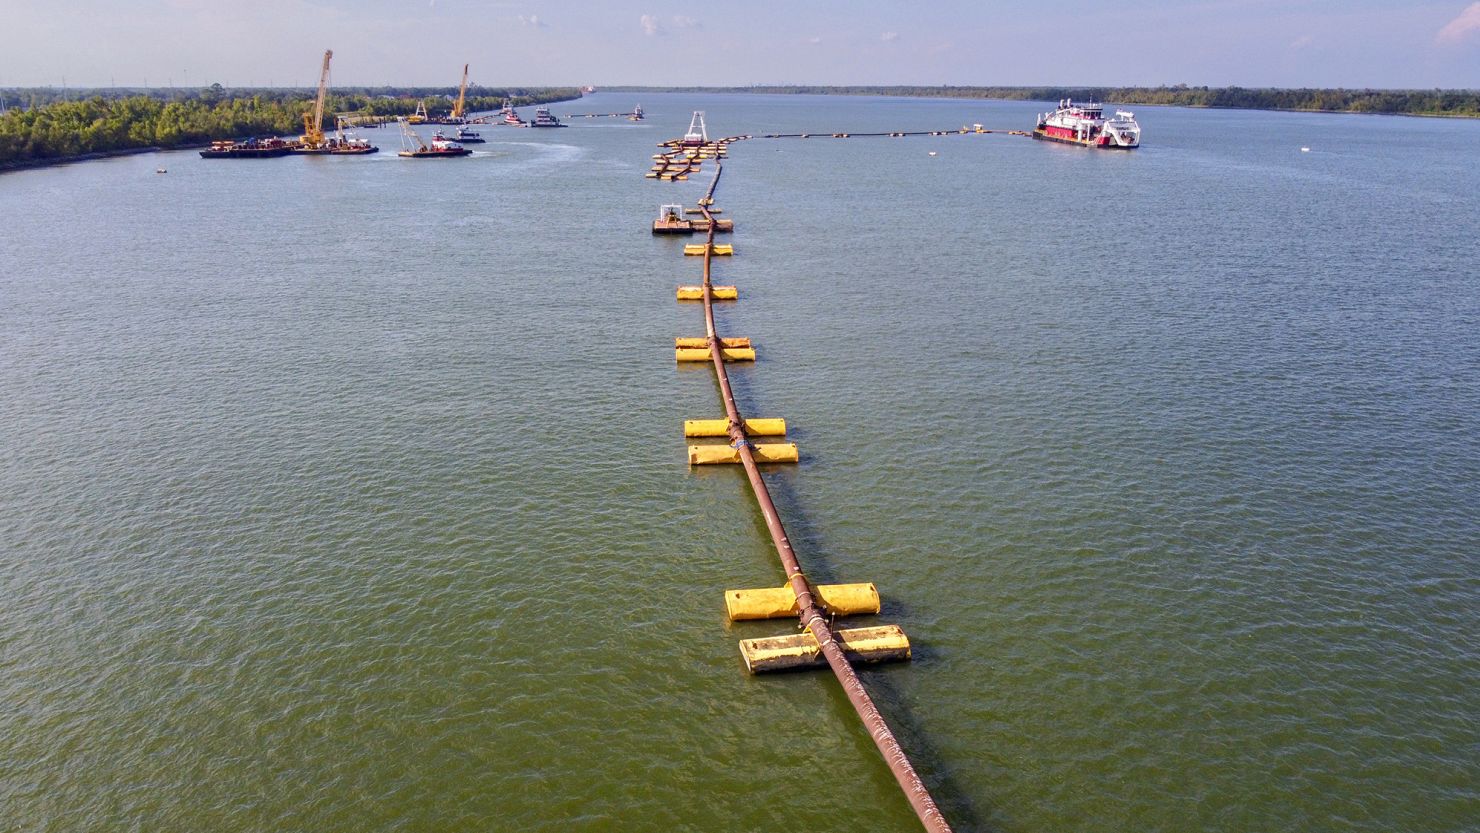 US Army Corps of Engineers crews use dredges and pipes to move silt onto an underwater sill along the bottom of the Mississippi River September 22, about 20 miles downriver from New Orleans.